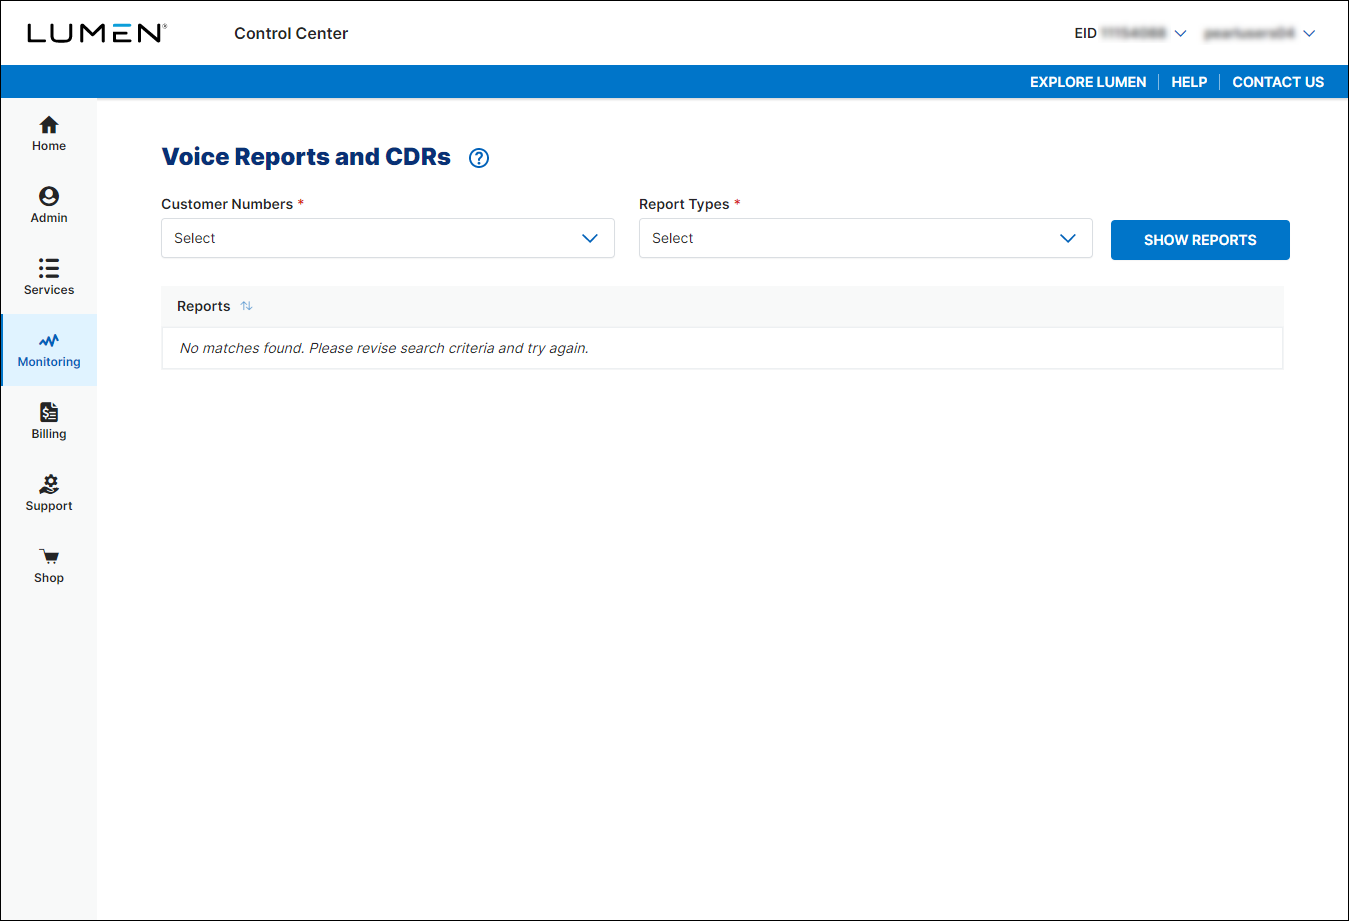 Voice Reports and CDRs